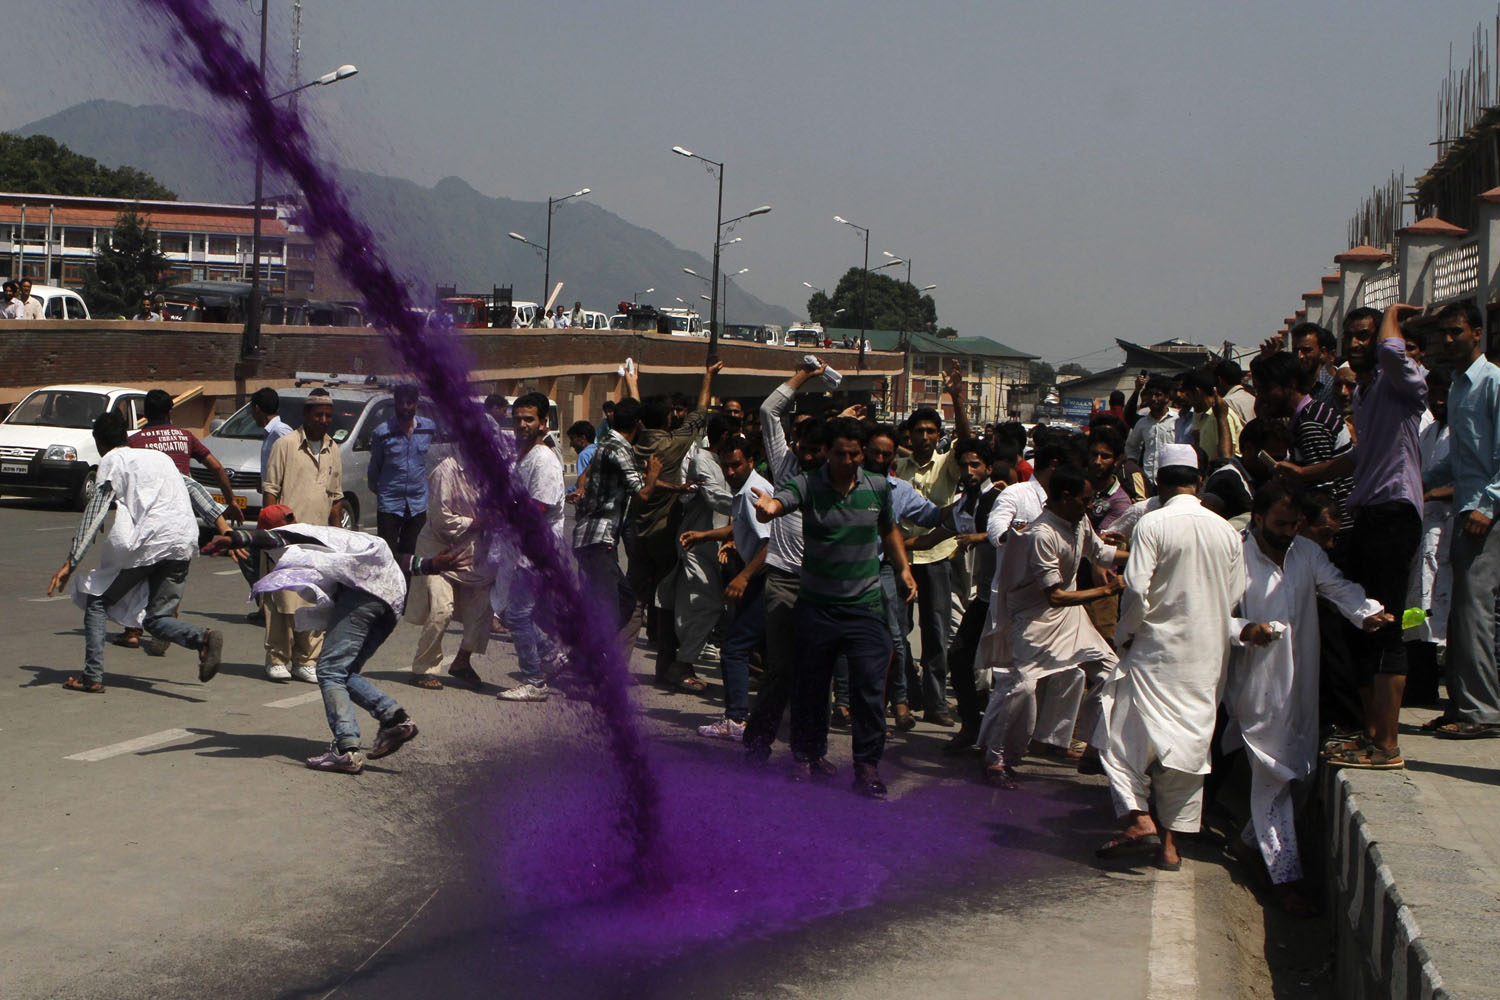 July 29, 2013. Government employees and Indian policemen run as police spray purple water during protests in Srinagar, the summer capital of Indian Kashmir.